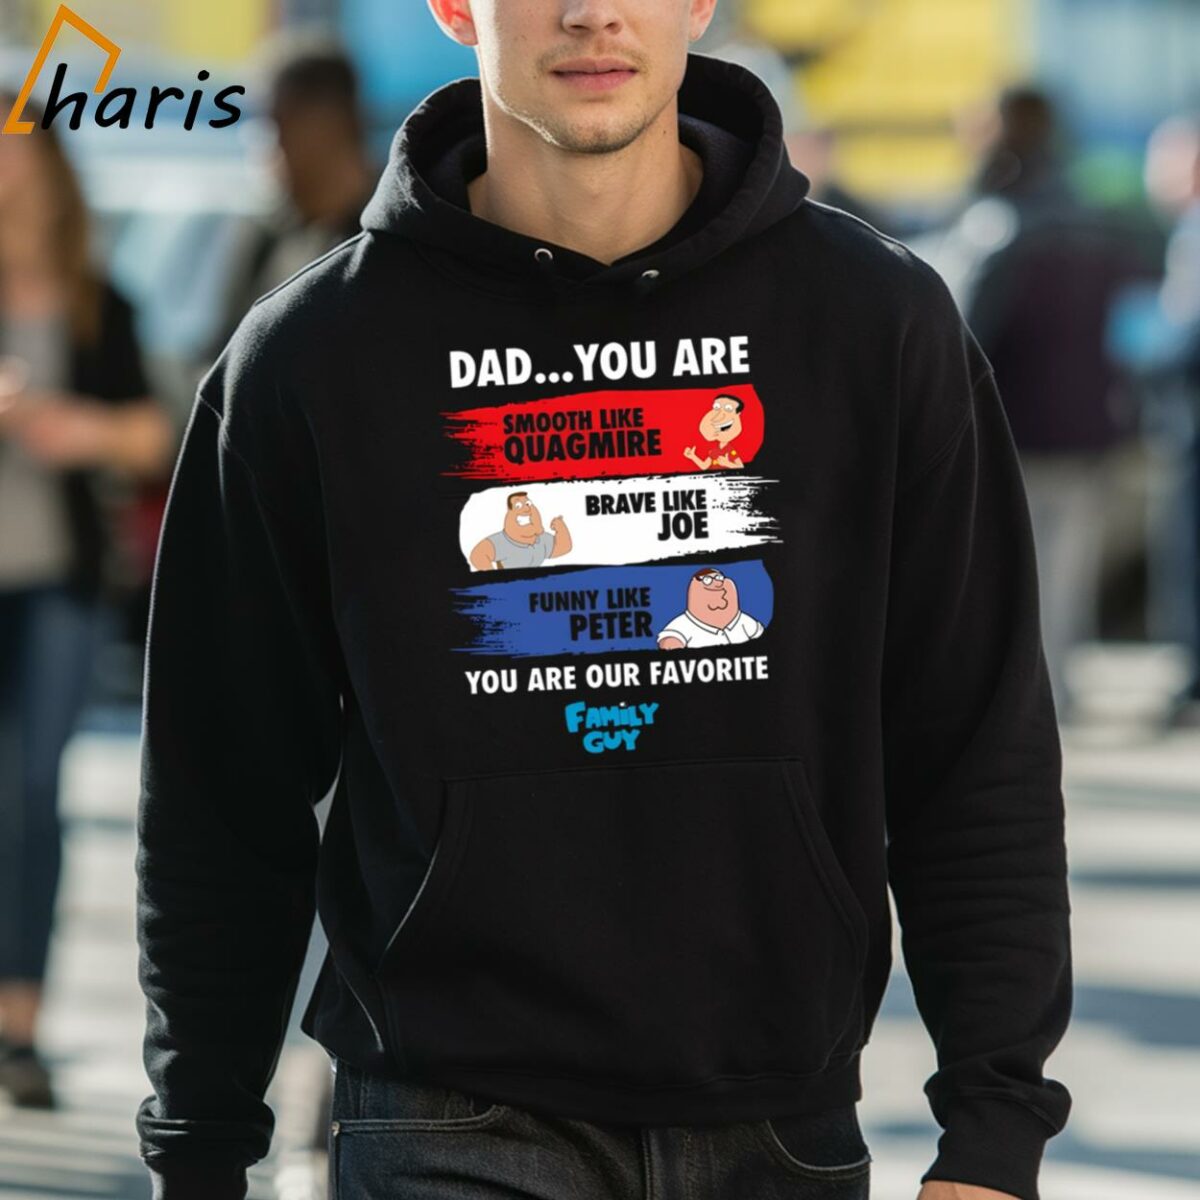 Dad You Are Smooth Like Quagmire Brave Like Joe Funny Like Peter You Are Our Favorite Family Guy Shirt 5 hoodie